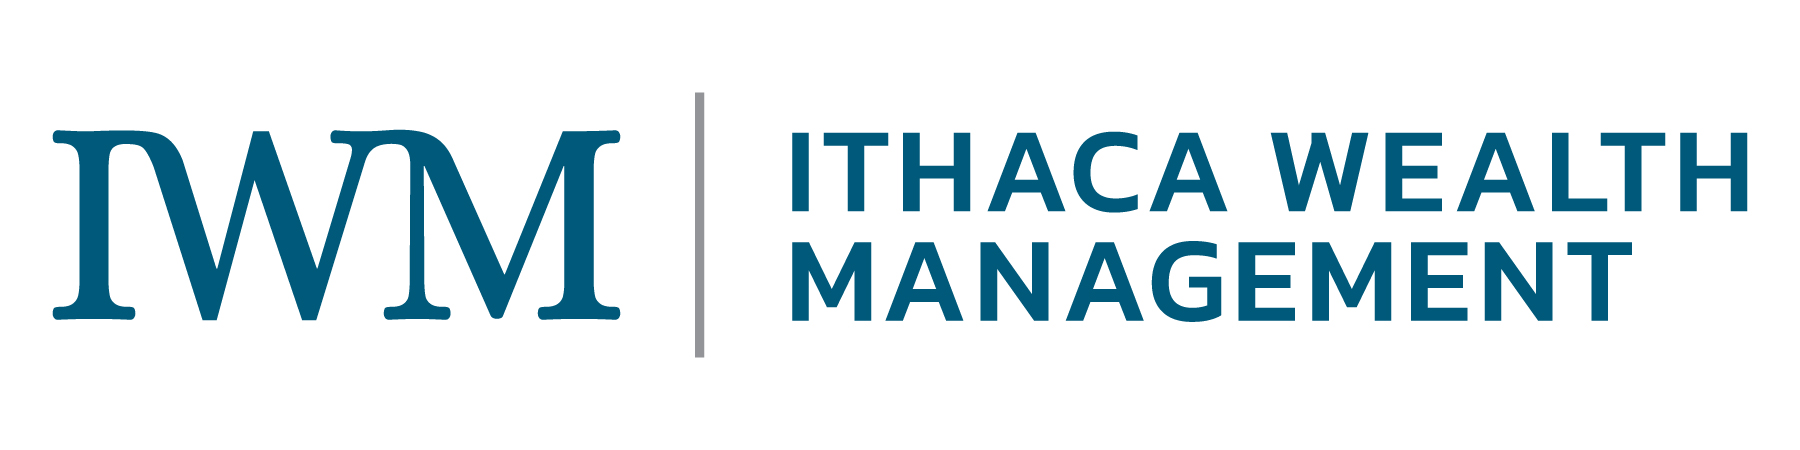 Ithaca Wealth Management is an independent, fee-only financial advisory firm that offers investment management and financial planning services.